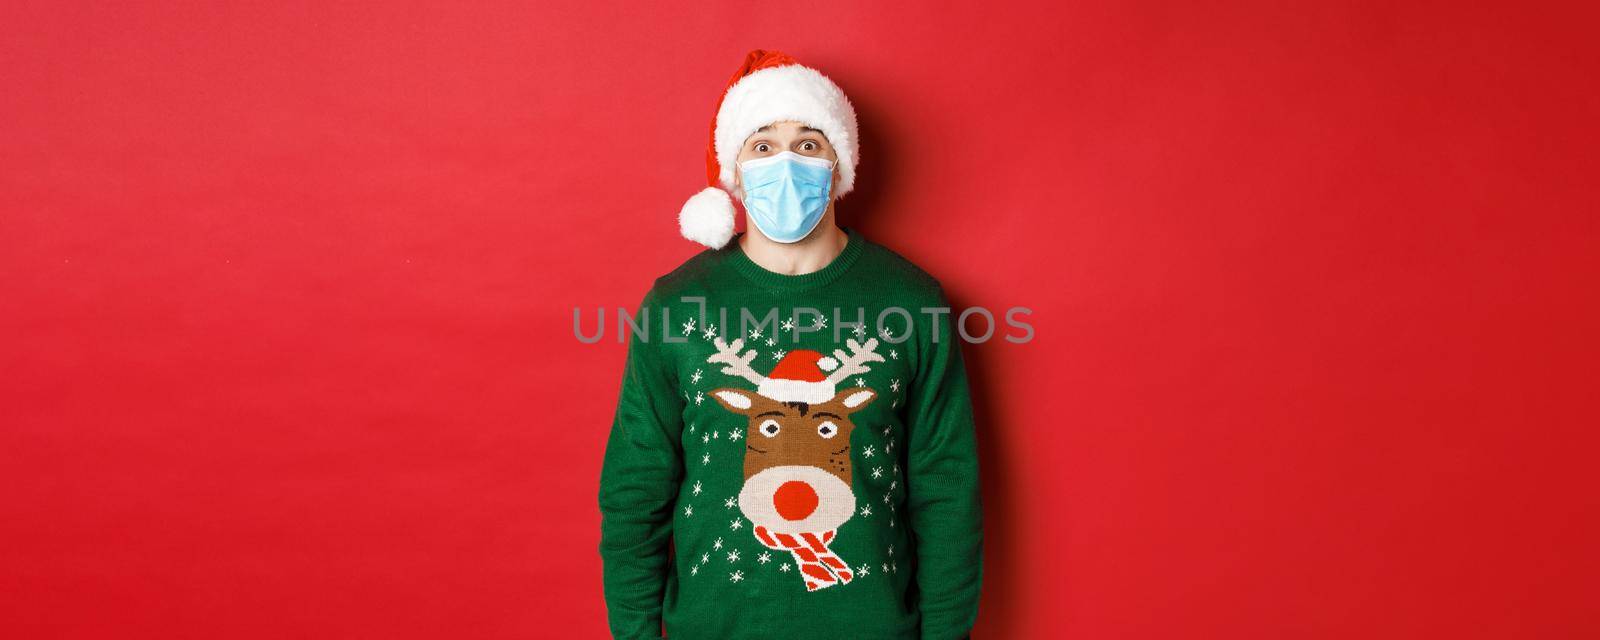 Concept of new year, covid-19 and social distancing. Surprised guy in santa hat, medical mask and christmas sweater looking amazed at camera, standing over red background.